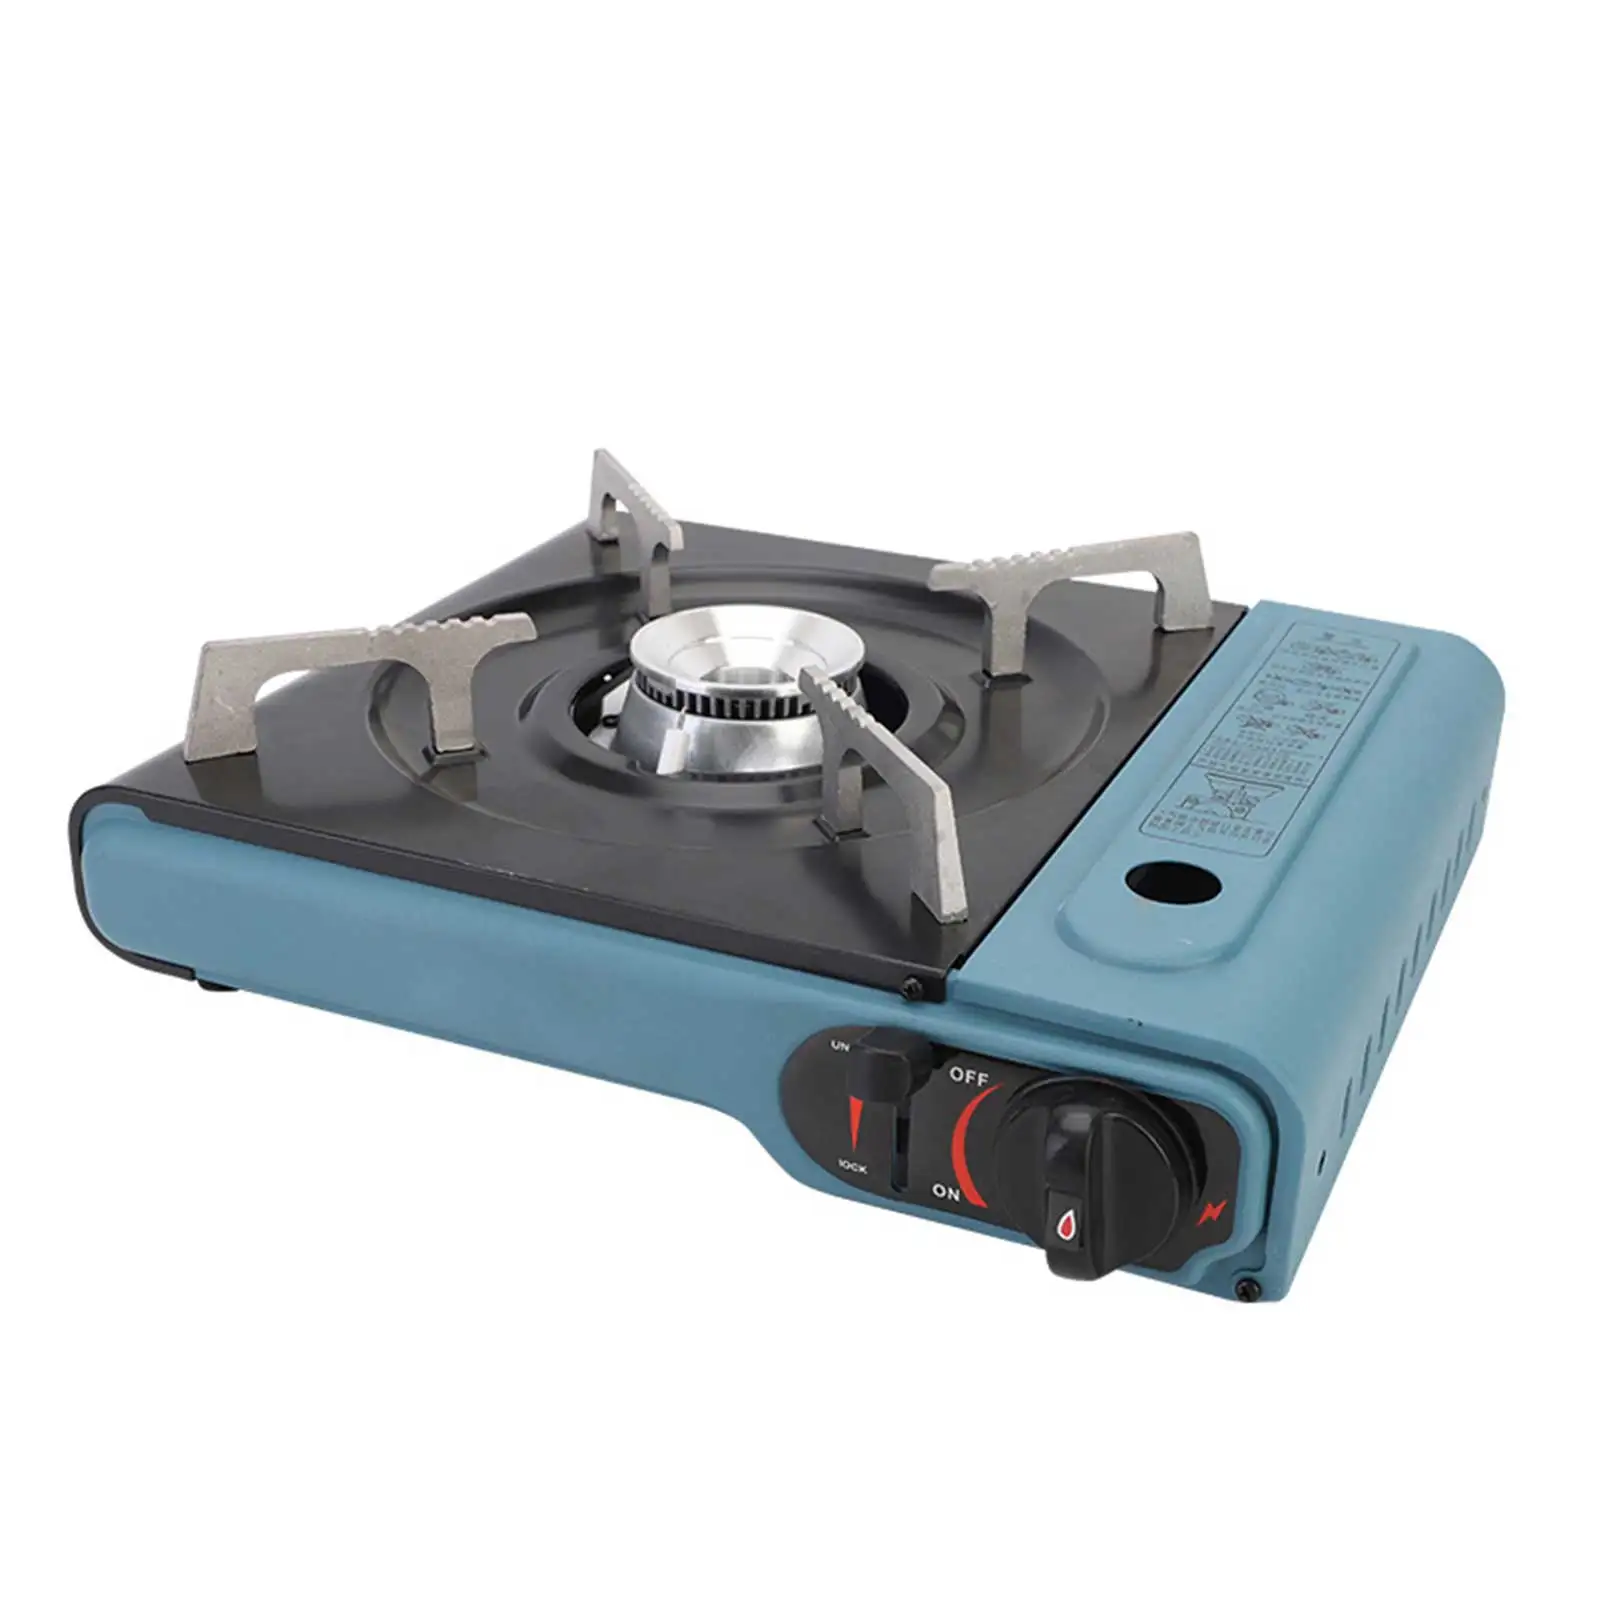 

Outdoor Camping Portable Gas Cooker Stove For Camping Hiking Accessories Adapter For Gas Cylinders Cooking